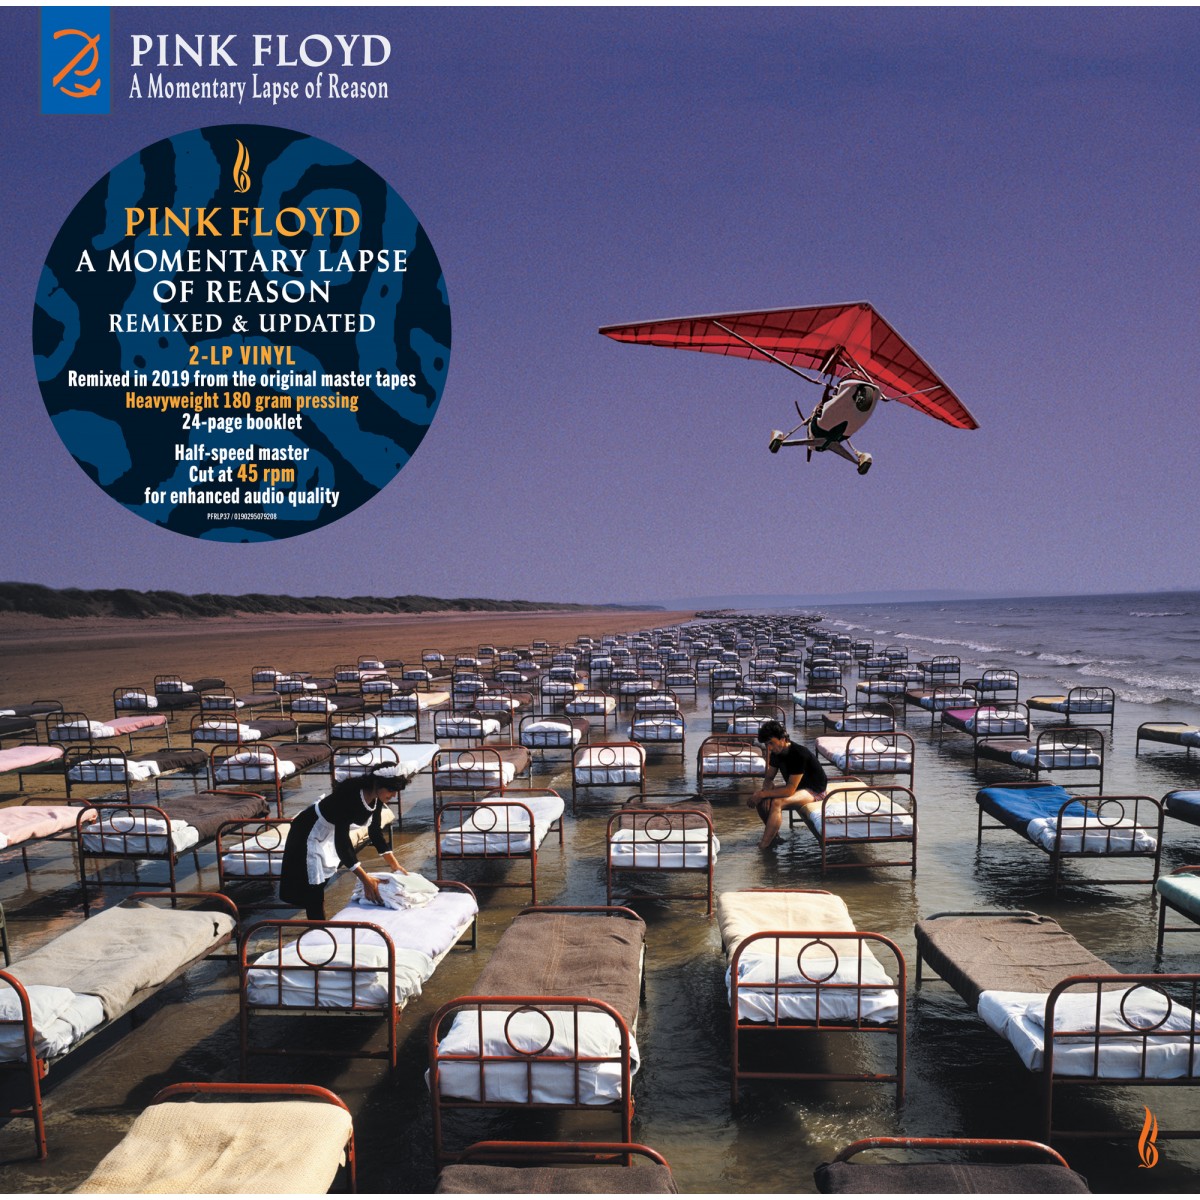 PINK FLOYD - A MOMENTARY LAPSE OF REASON (2LP Half Speed)